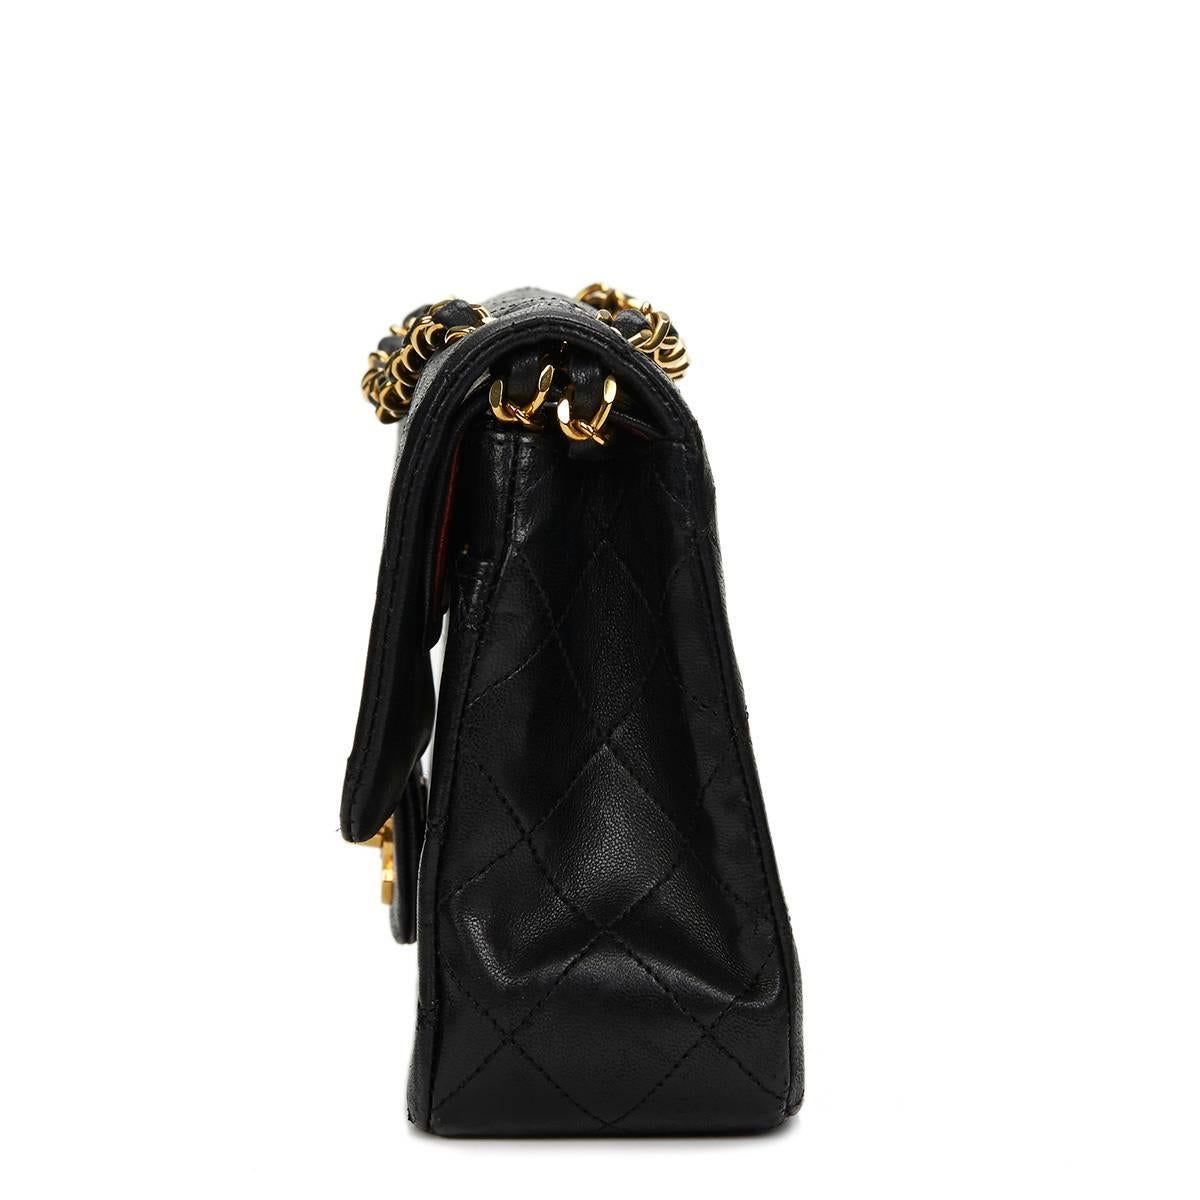 CHANEL
Black Quilted Lambskin Vintage Small Classic Double Flap Bag

This CHANEL Small Classic Double Flap Bag is in Very Good Pre-Owned Condition accompanied by Chanel Dust Bag, Authenticity Card. Circa 1988. Primarily made from Lambskin Leather